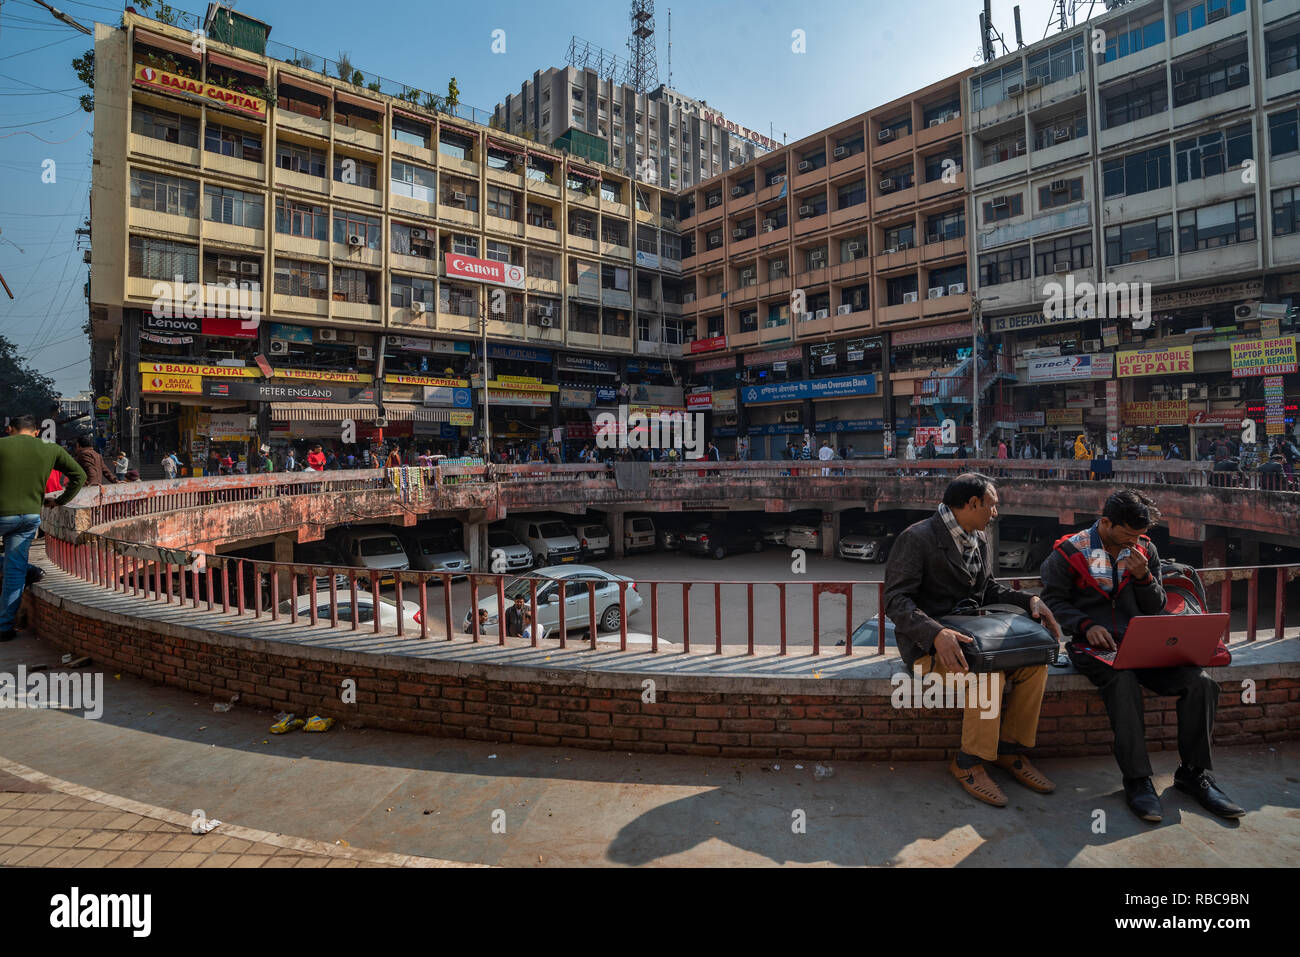 View of a courtyard in Nehru Place, New Delhi, India which is the hub of digital technology: scene shows two people in foreground sitting in the sun. Stock Photo